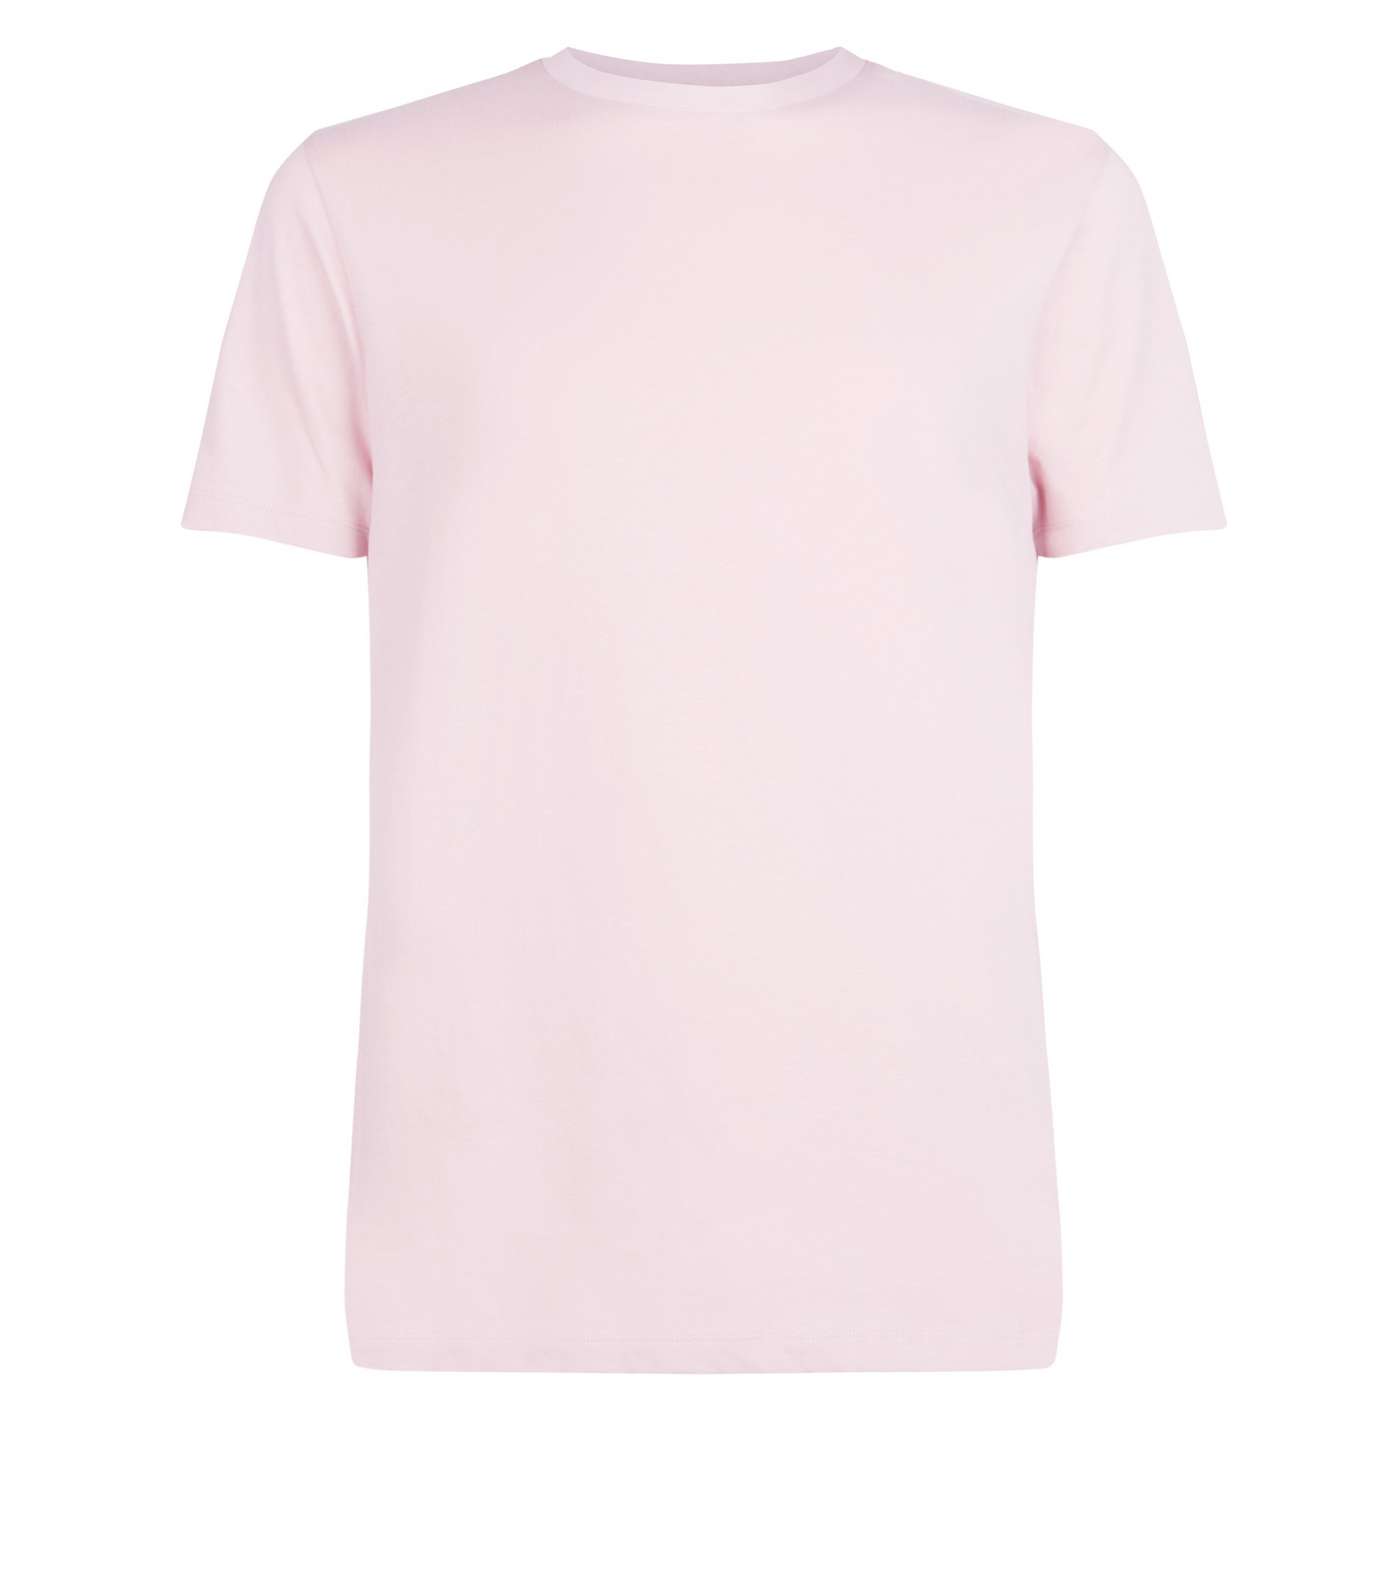 Light Pink Short Sleeve Muscle Fit T-Shirt Image 4